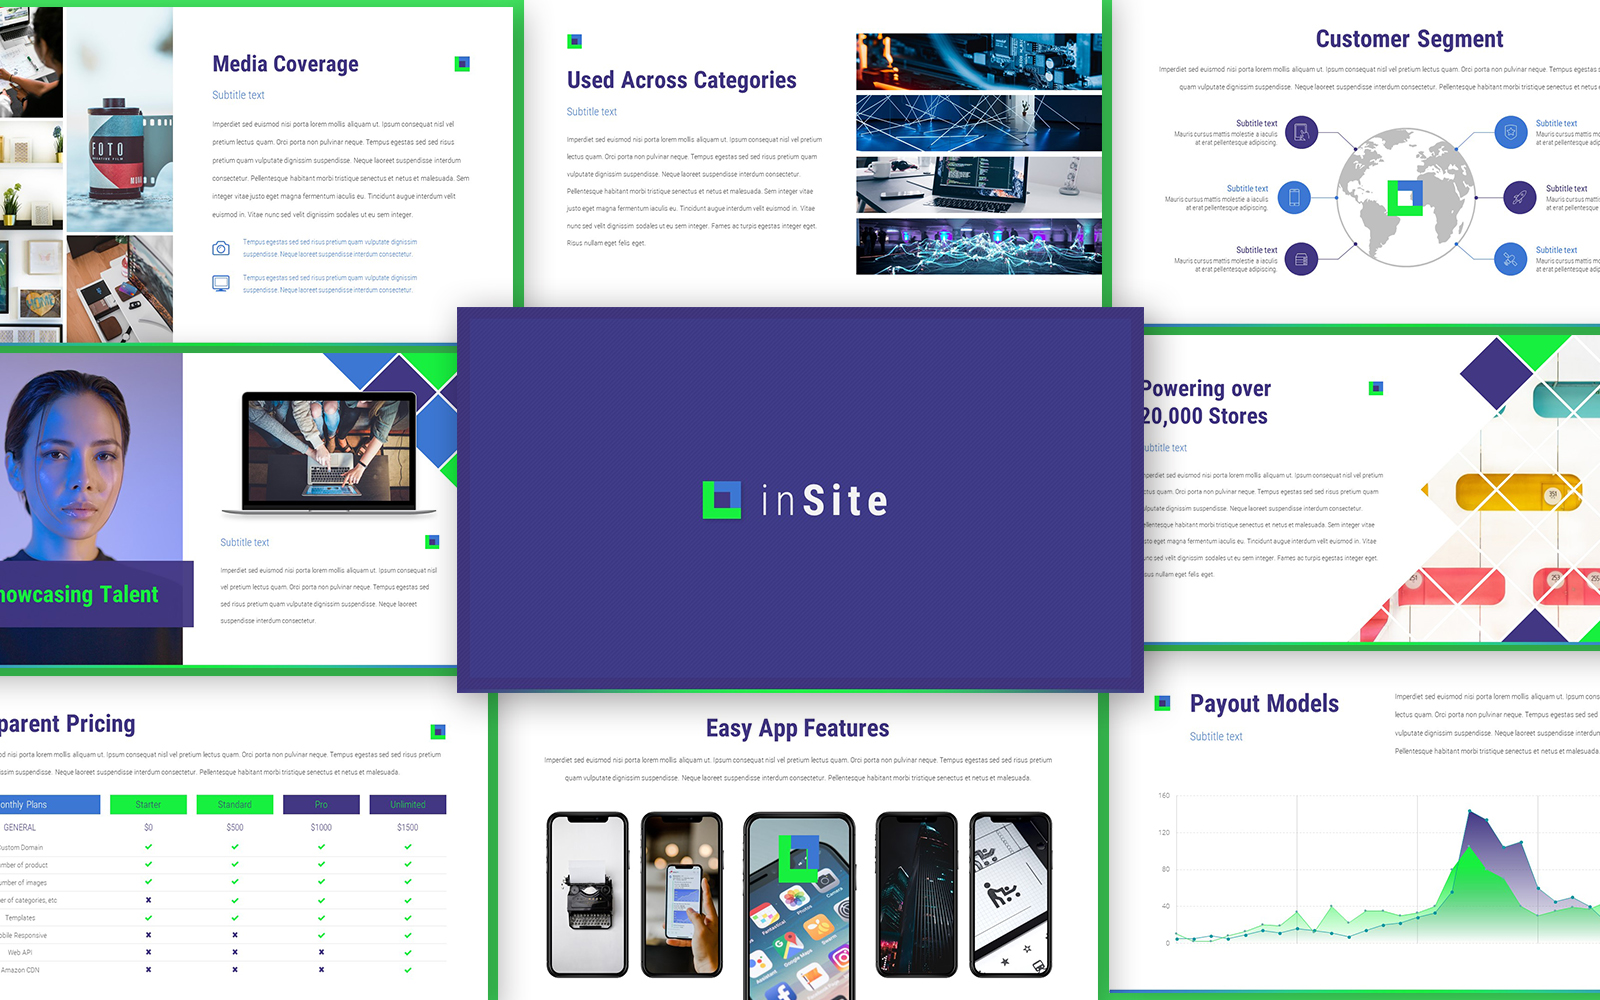 InSite Powerpoint Template